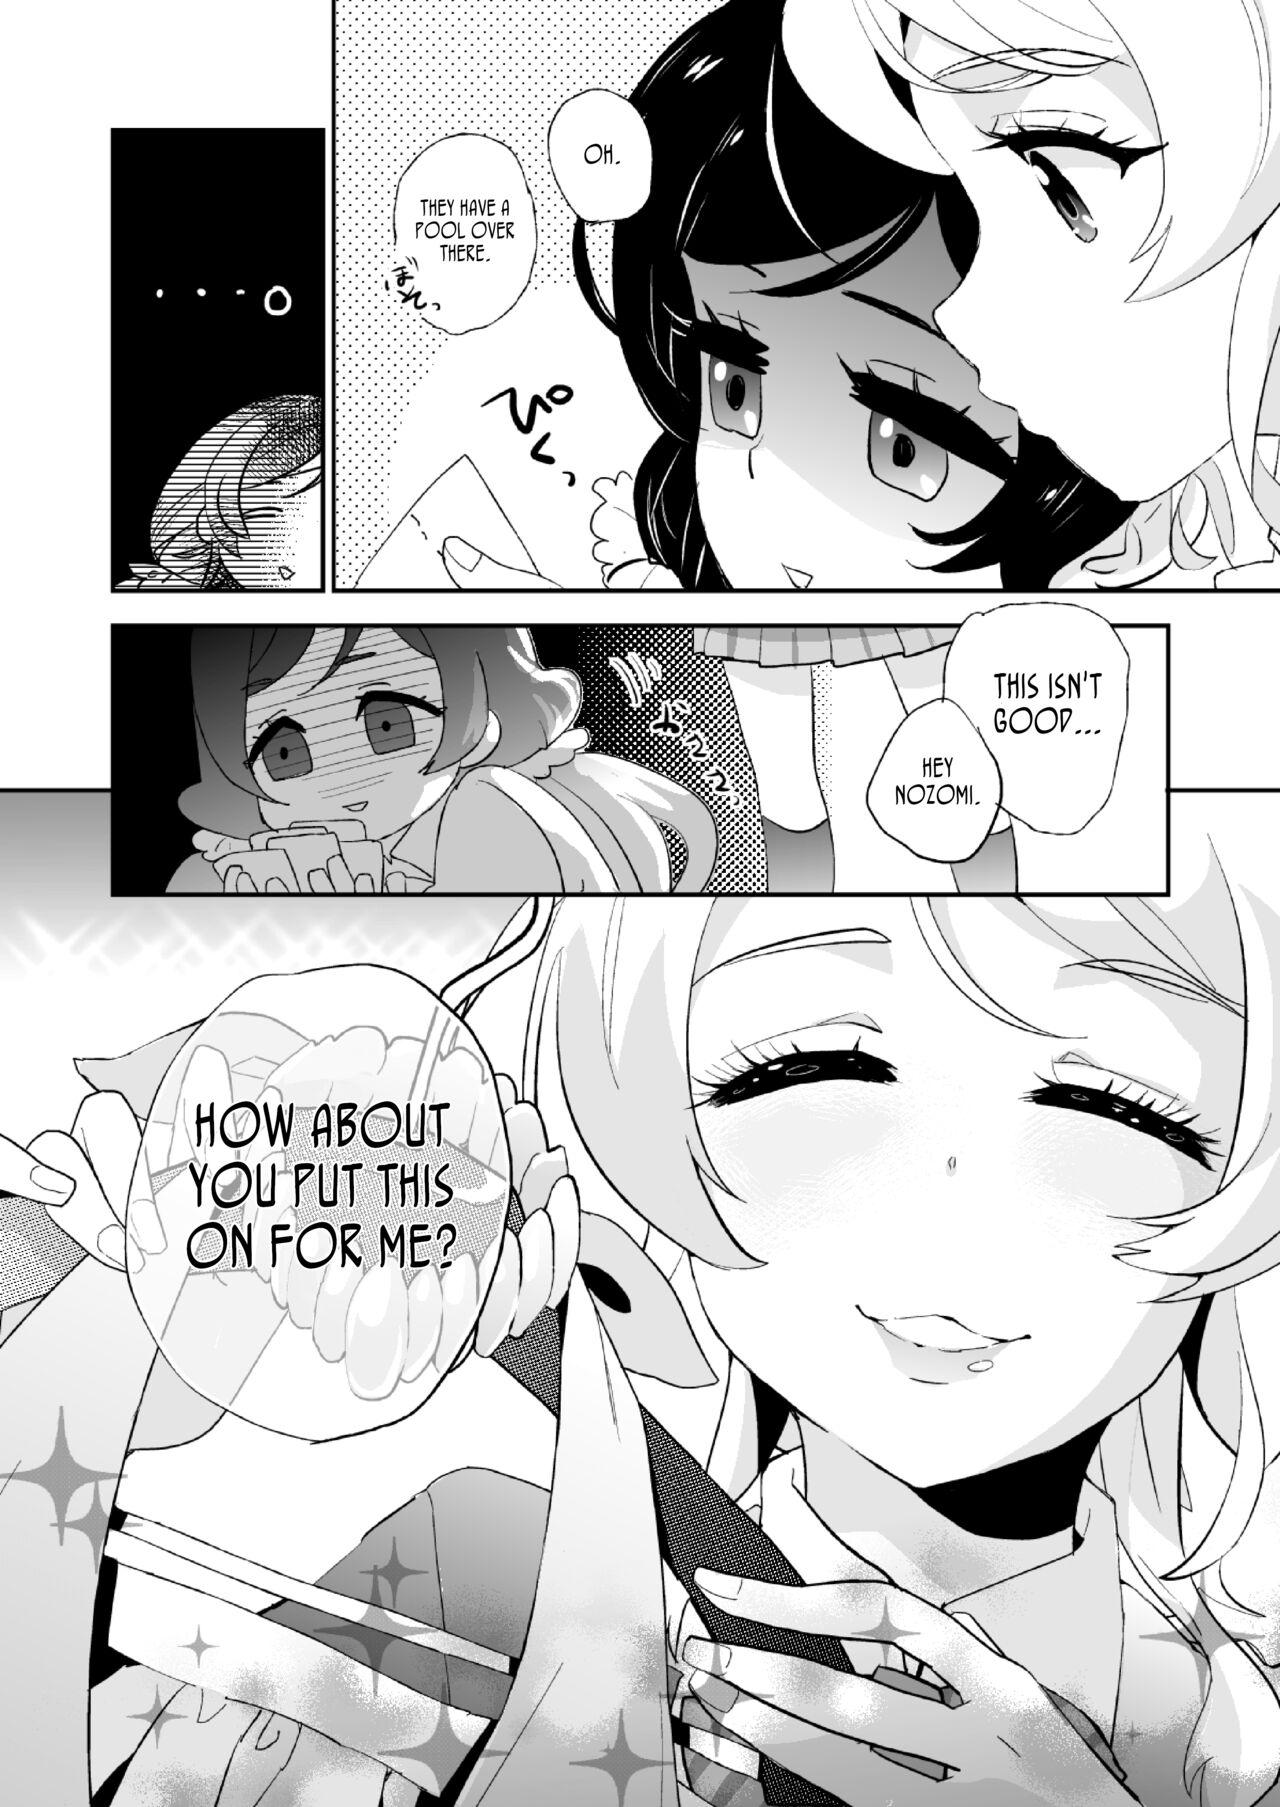 Doggystyle Luminous - Love live Humiliation - Page 4